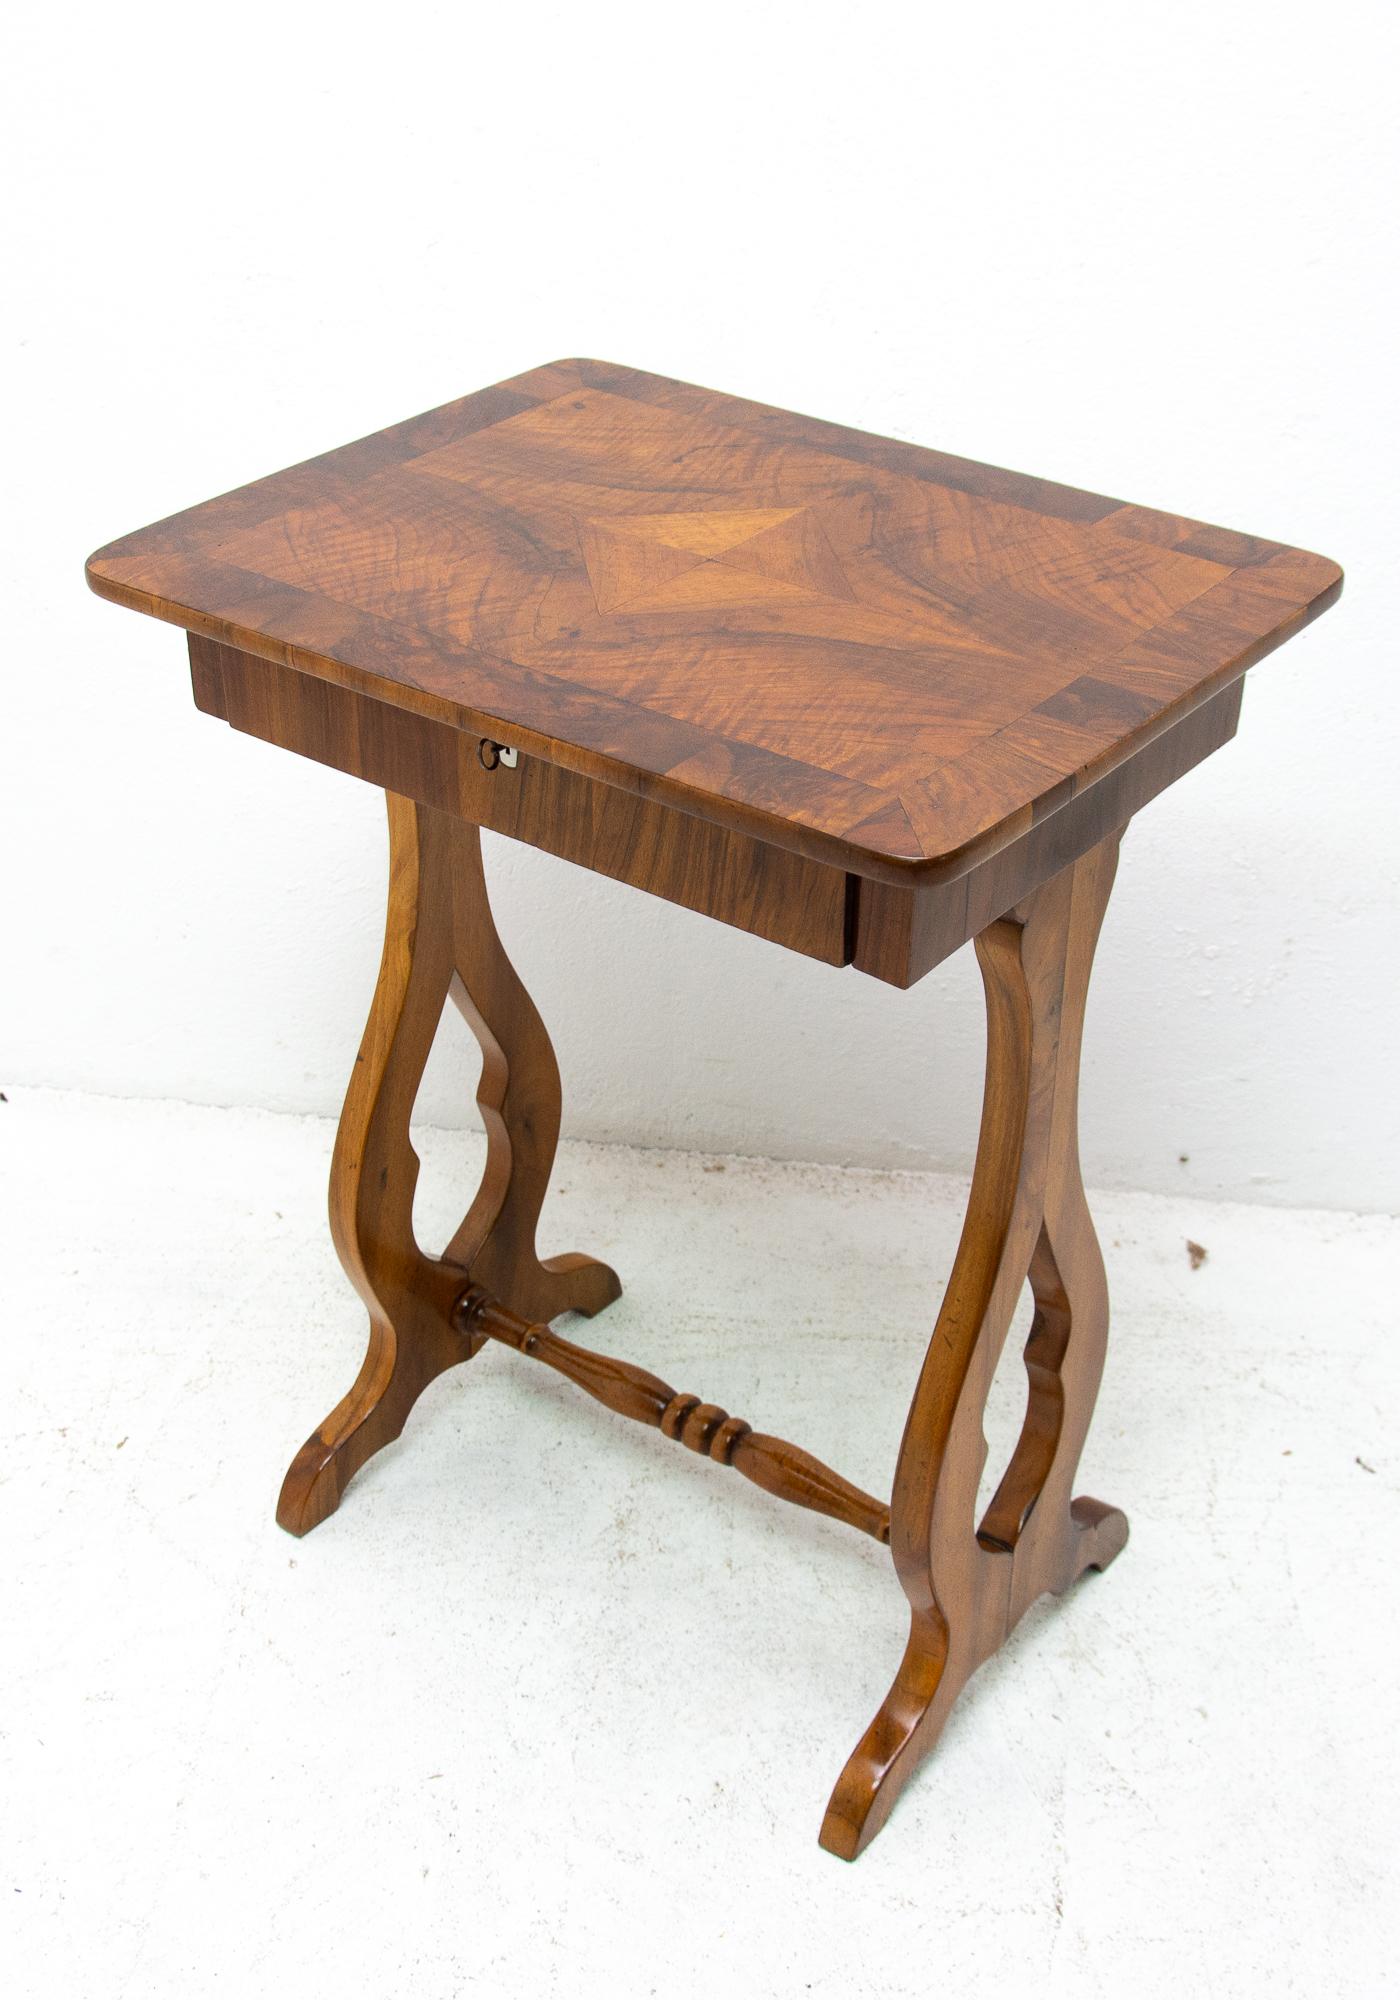 Original Early 19th Century Biedermeier Sewing Table, Austria-Hungary, 1830 In Good Condition In Prague 8, CZ